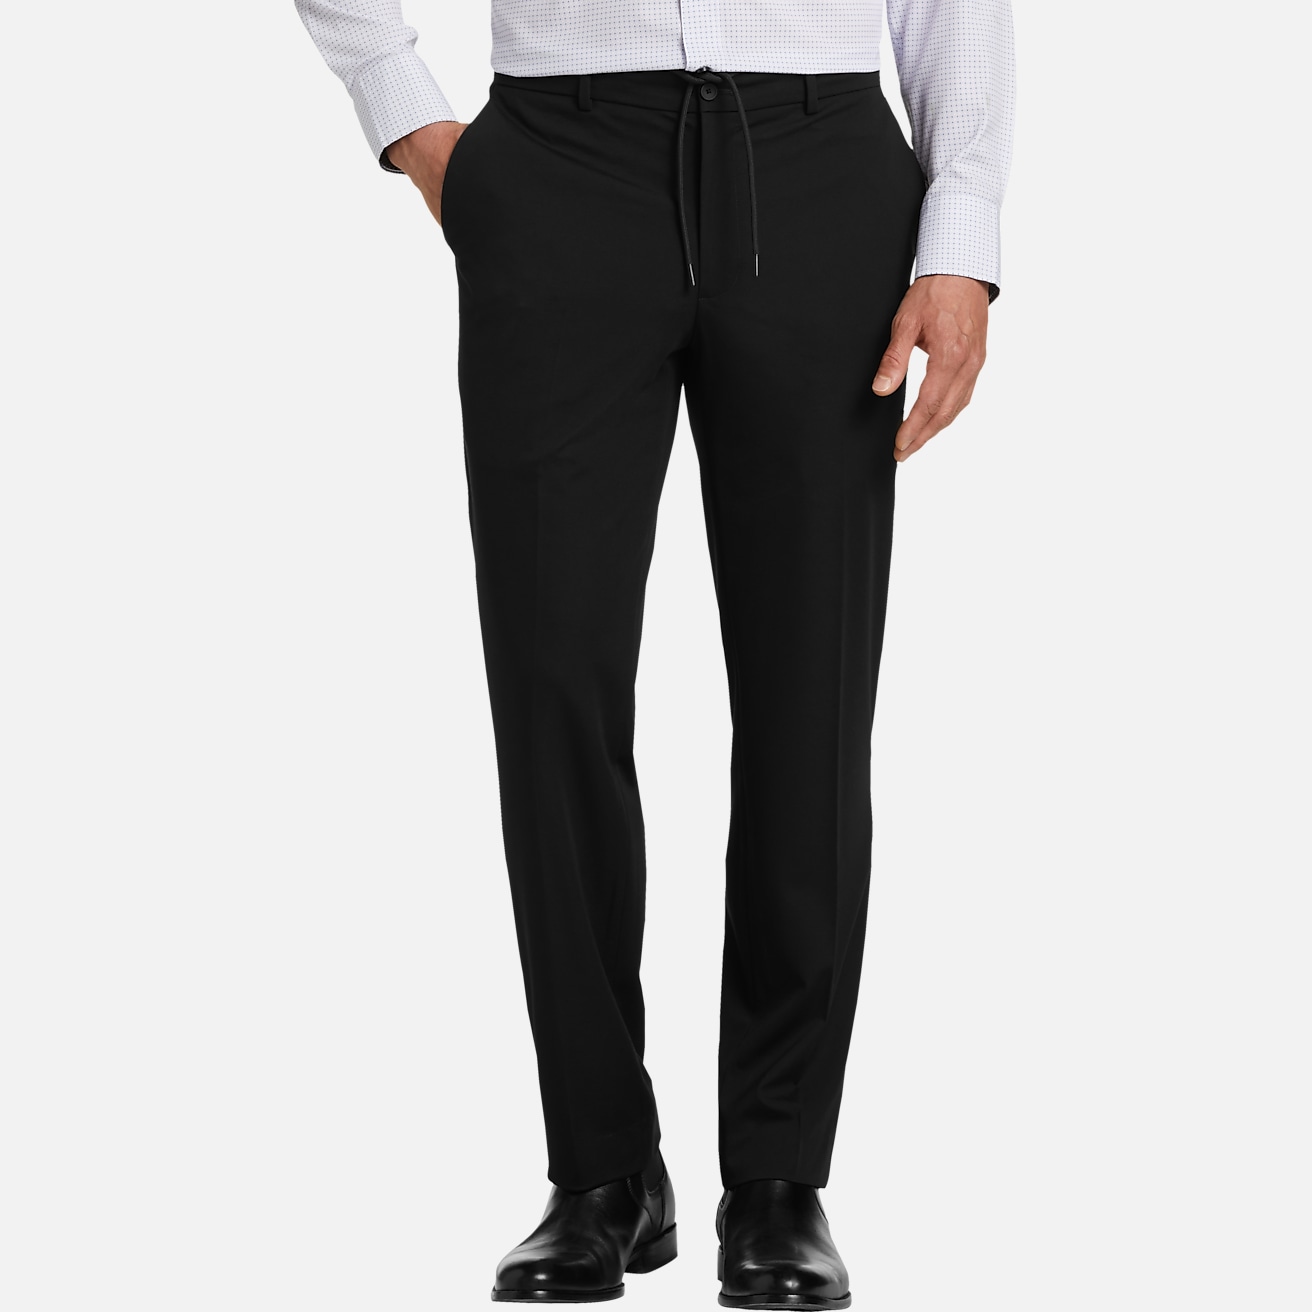 https://image.menswearhouse.com/is/image/TMW/TMW_3W9L_02_AWEARNESS_KENNETH_COLE_SUIT_SEPARATE_PANTS_BLACK_SOLID_MAIN?imPolicy=pdp-mob-2x